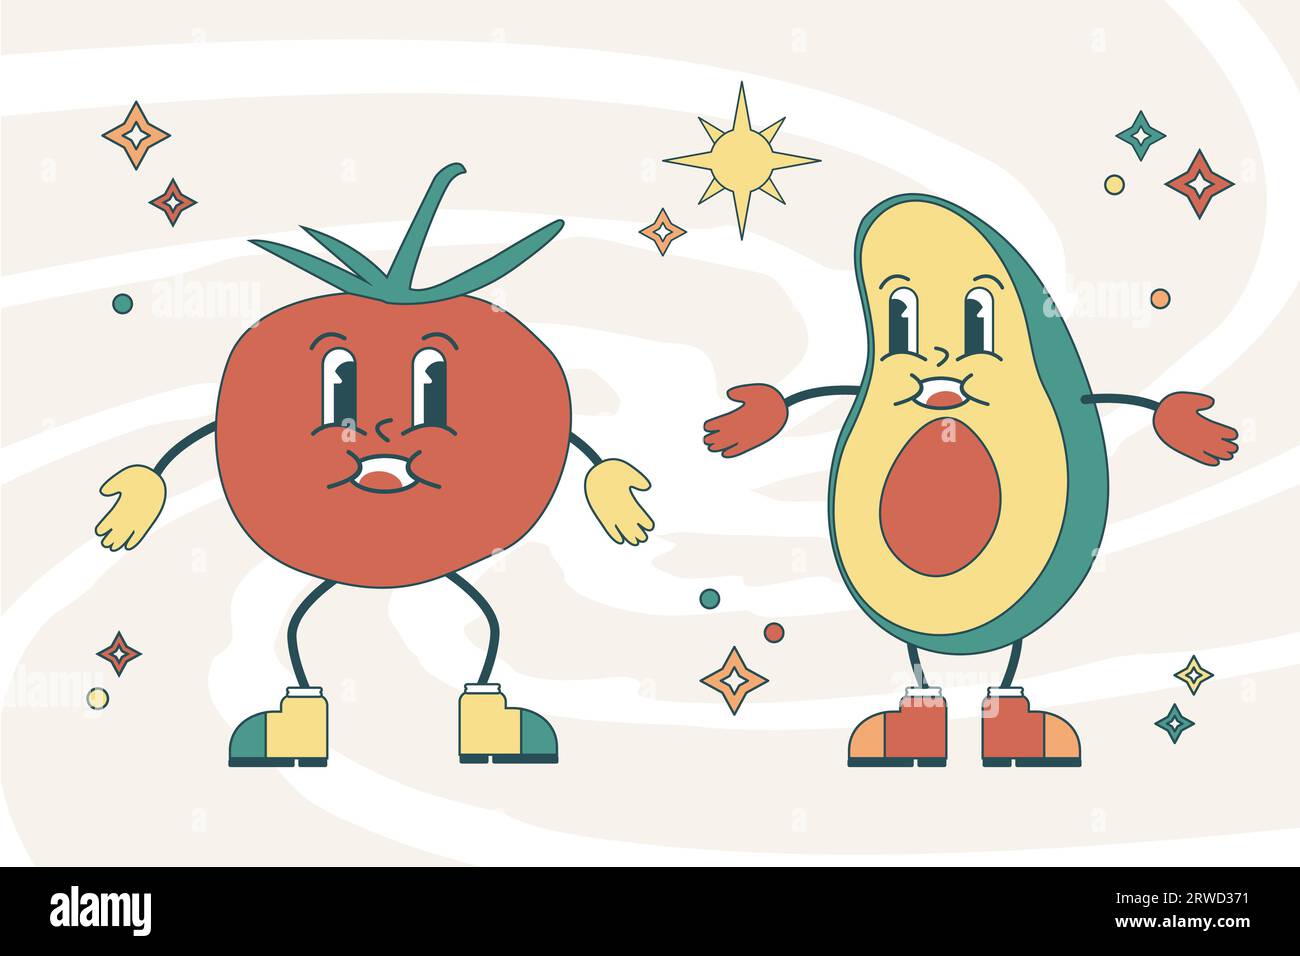 Groovy Cute Illustration of Tomato and Avocado Characters Stock Vector